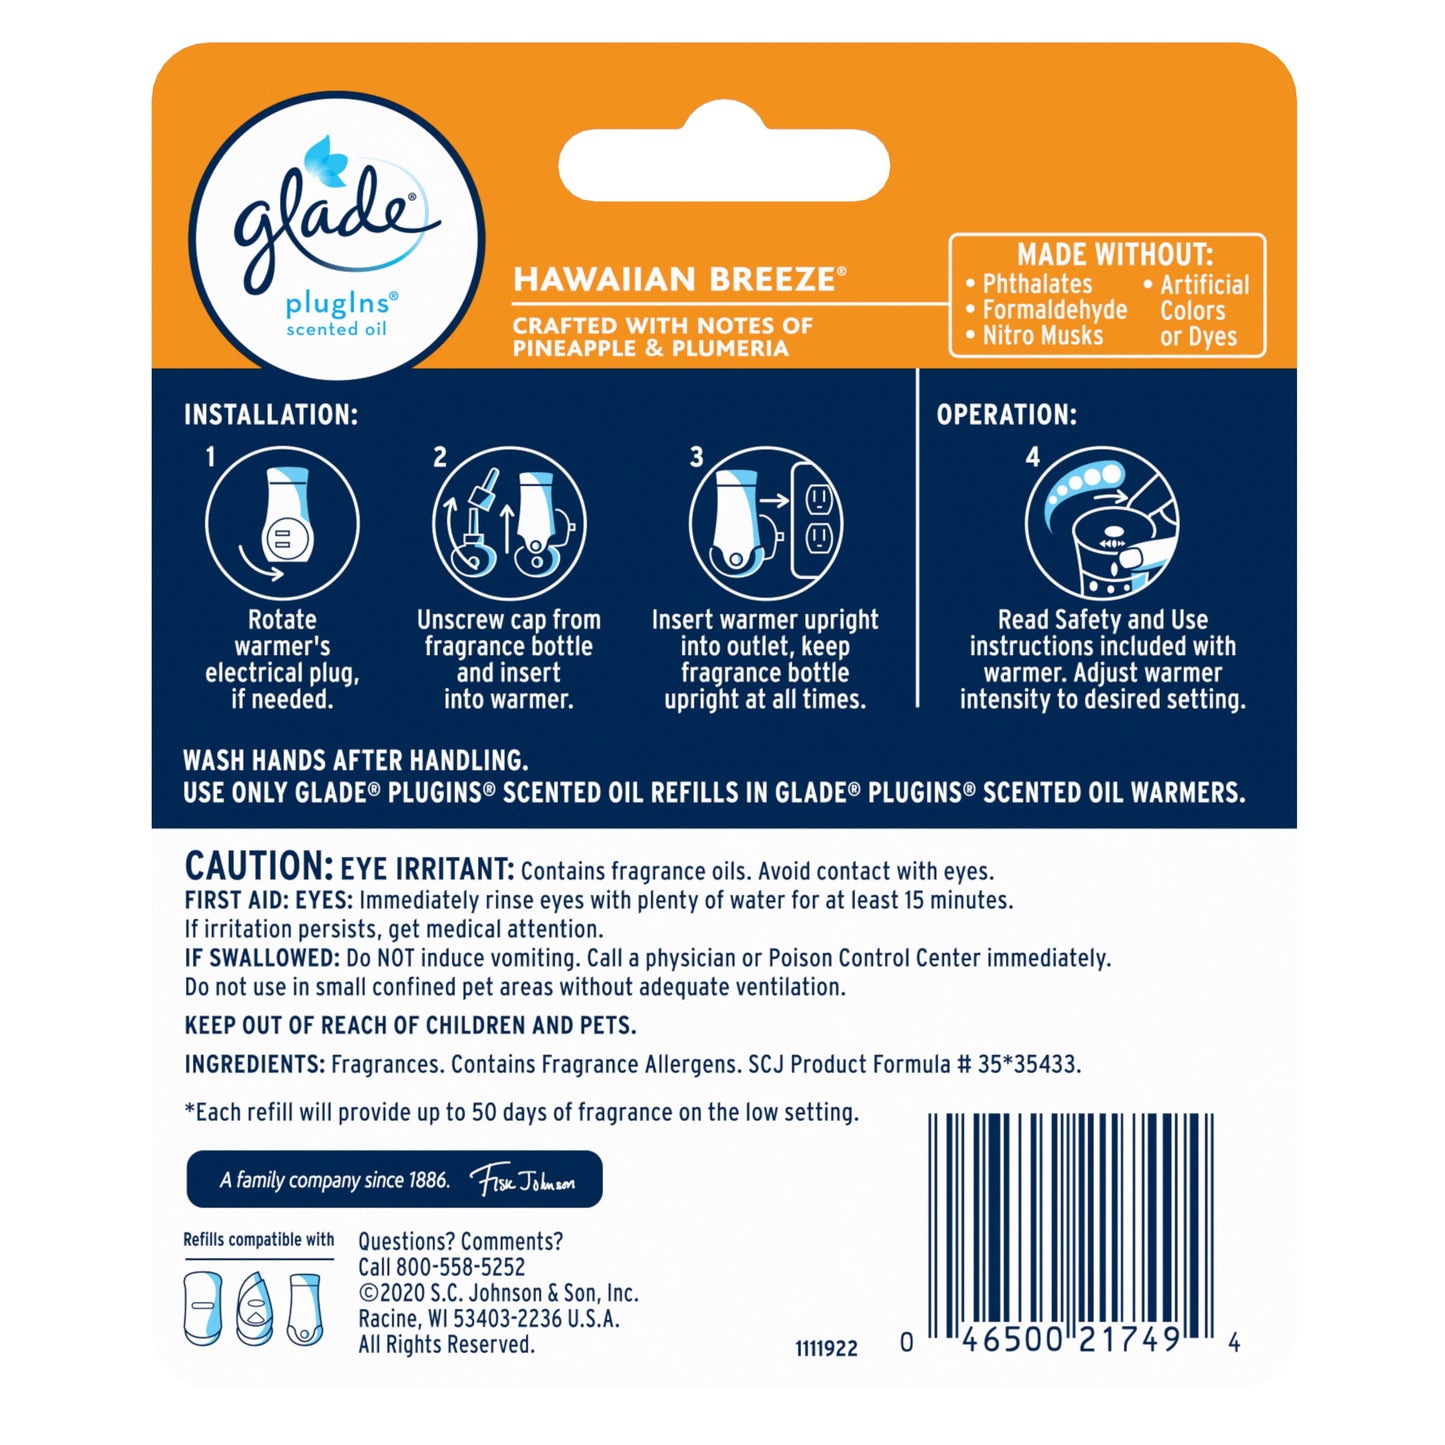 Glade PlugIns Refill 2 ct, Hawaiian Breeze, 1.34 FL. oz. Total, Scented Oil Air Freshener Infused with Essential Oils